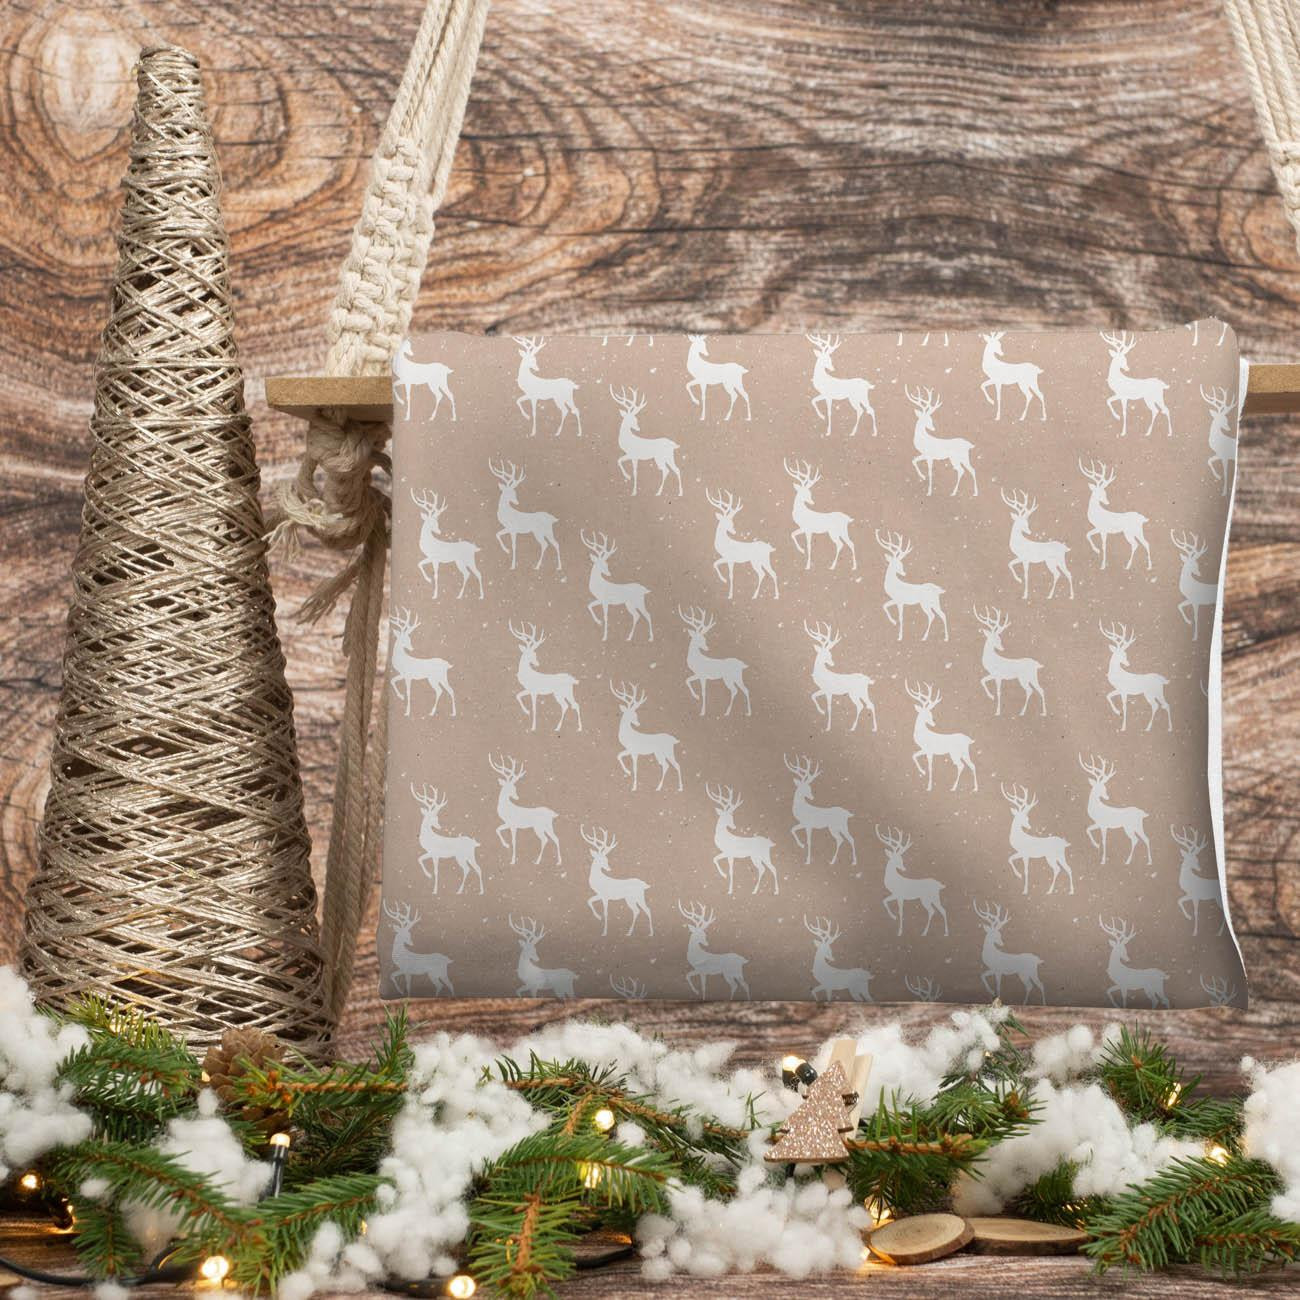 WHITE DEERS (WHITE CHRISTMAS) - looped knit fabric